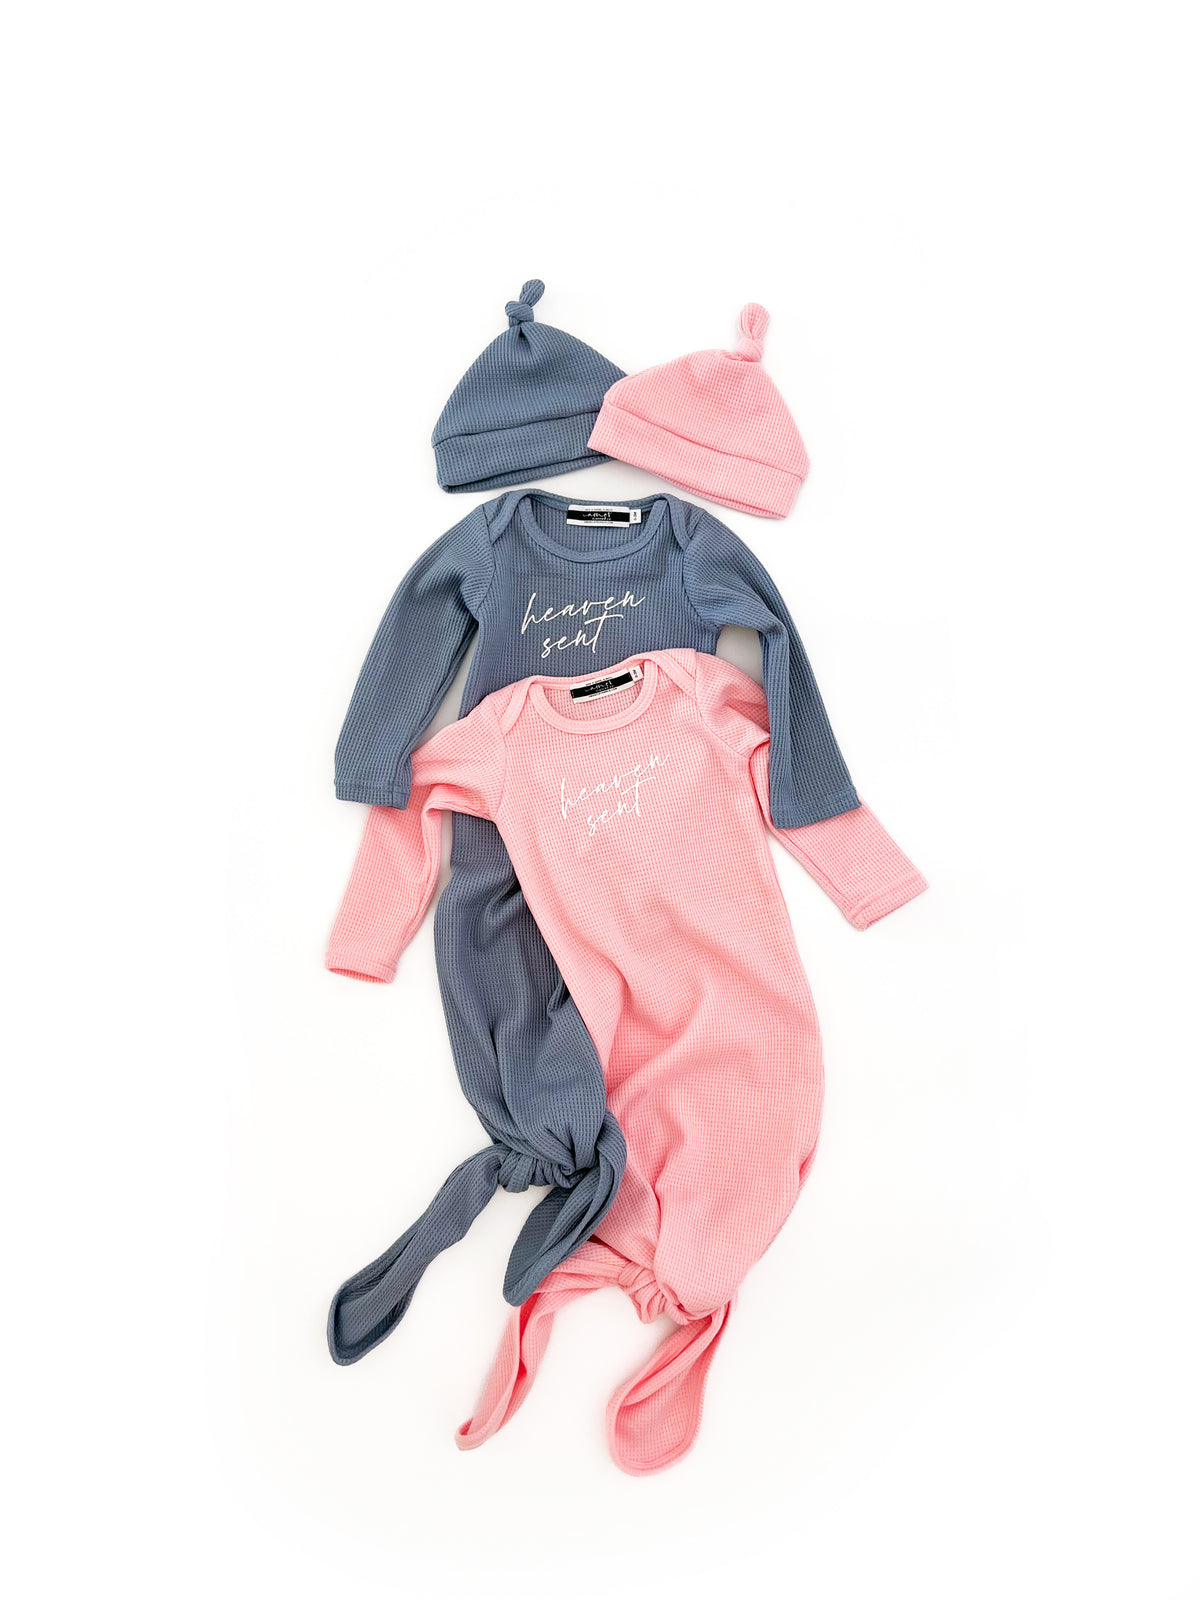 Heaven Sent Knotted Baby Sleeper & Matching Beanie